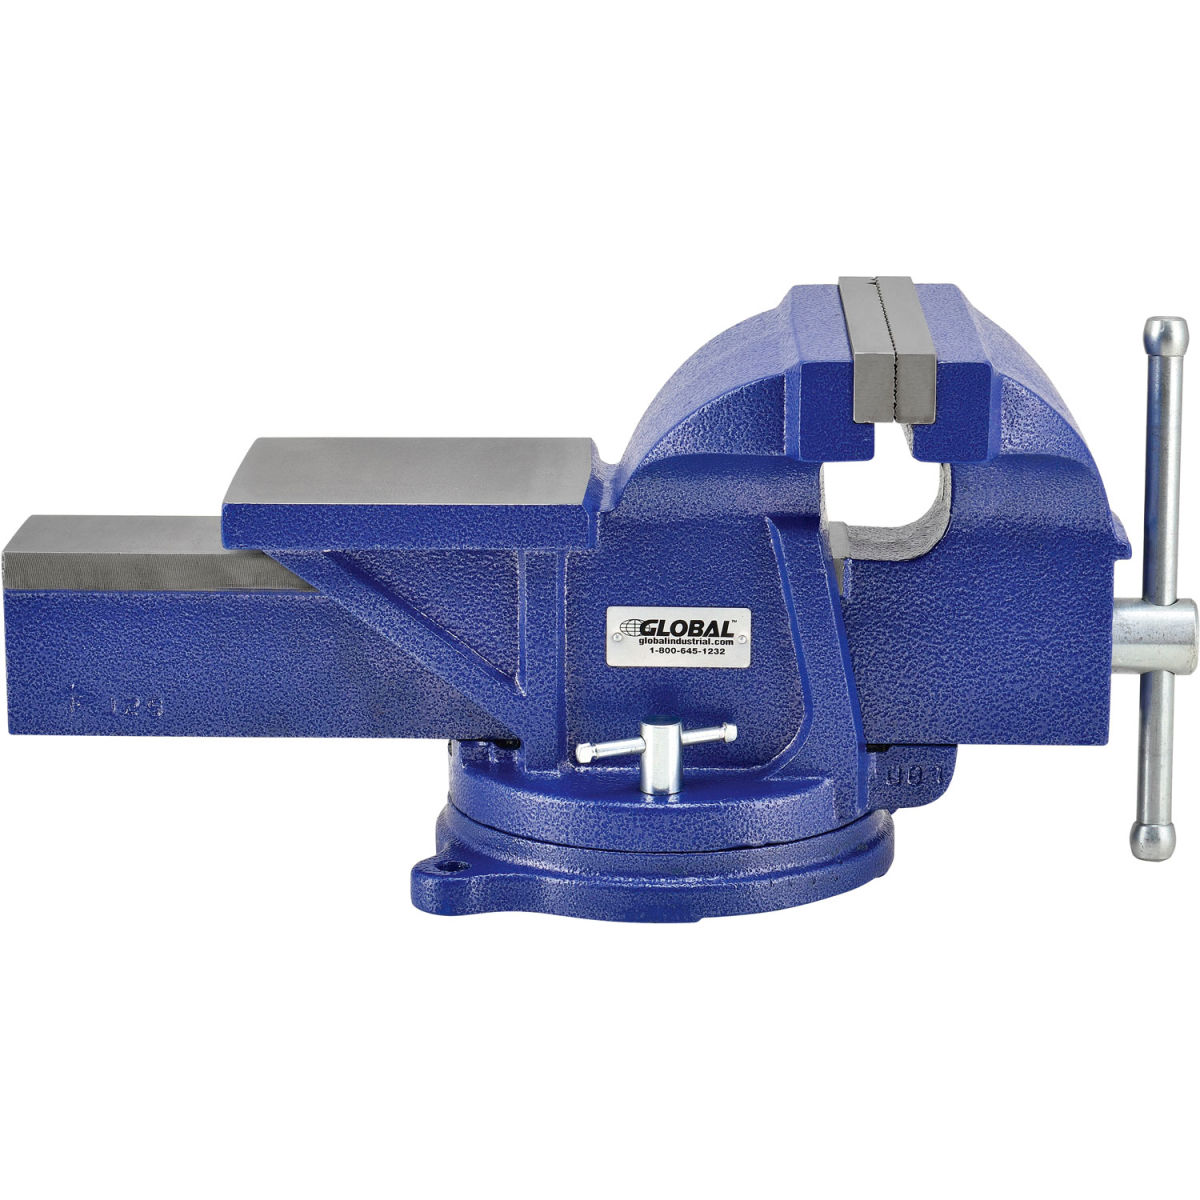 Picture of Laizhou Hongyuan 535657 8 in. Global Industrial Jaw General Purpose Bench Vise with Swivel Base